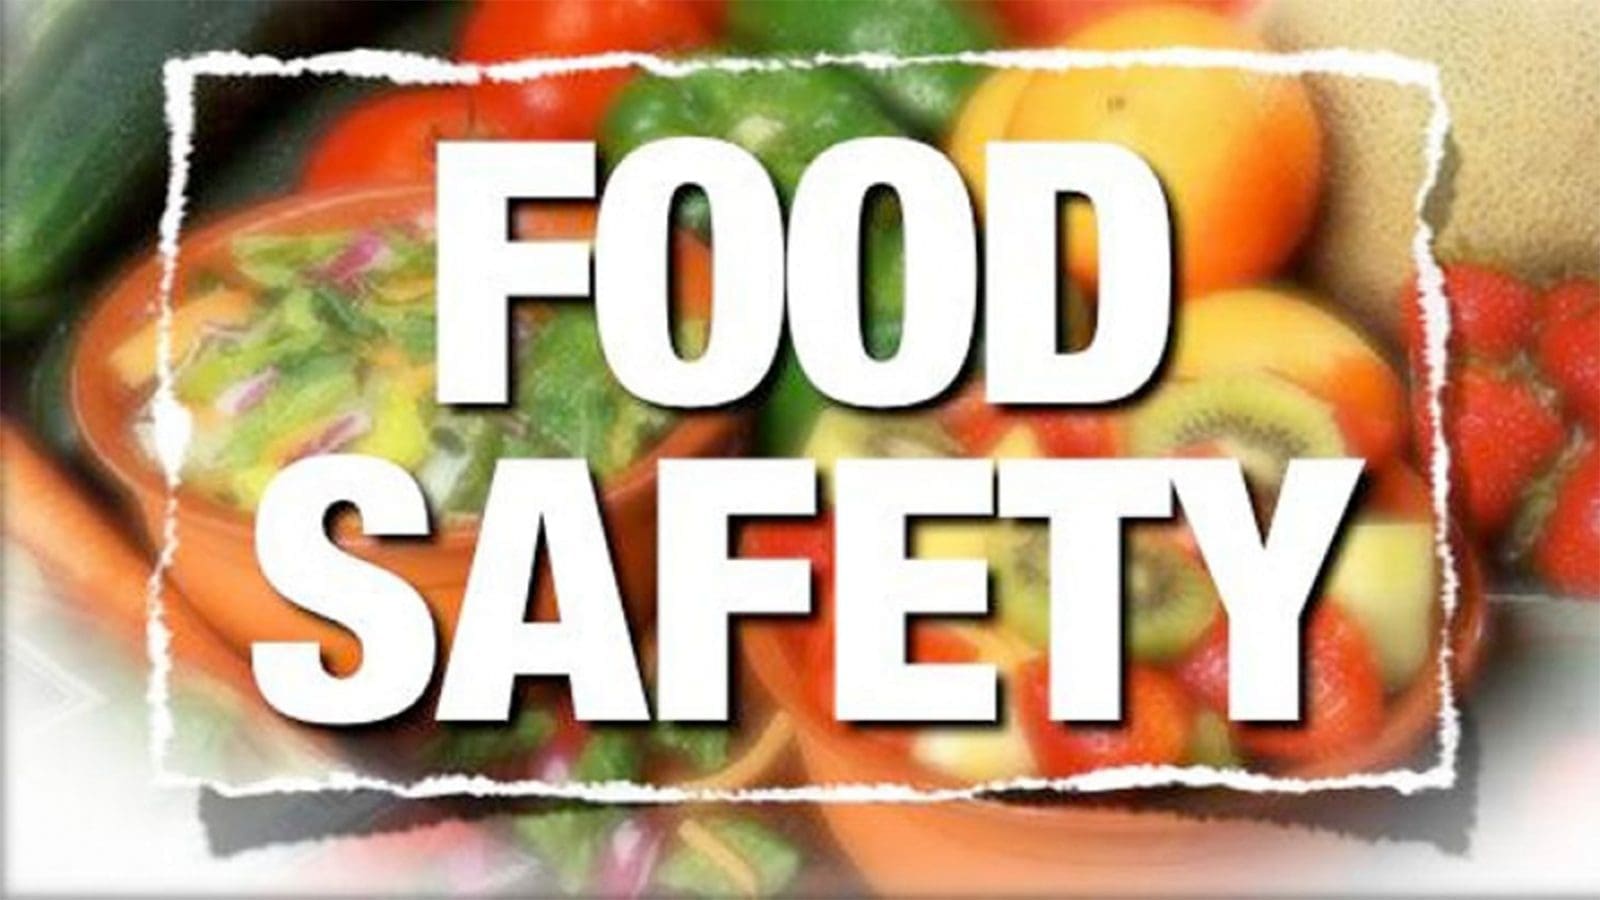 European Commission evaluates four nations’ food safety system preparedness